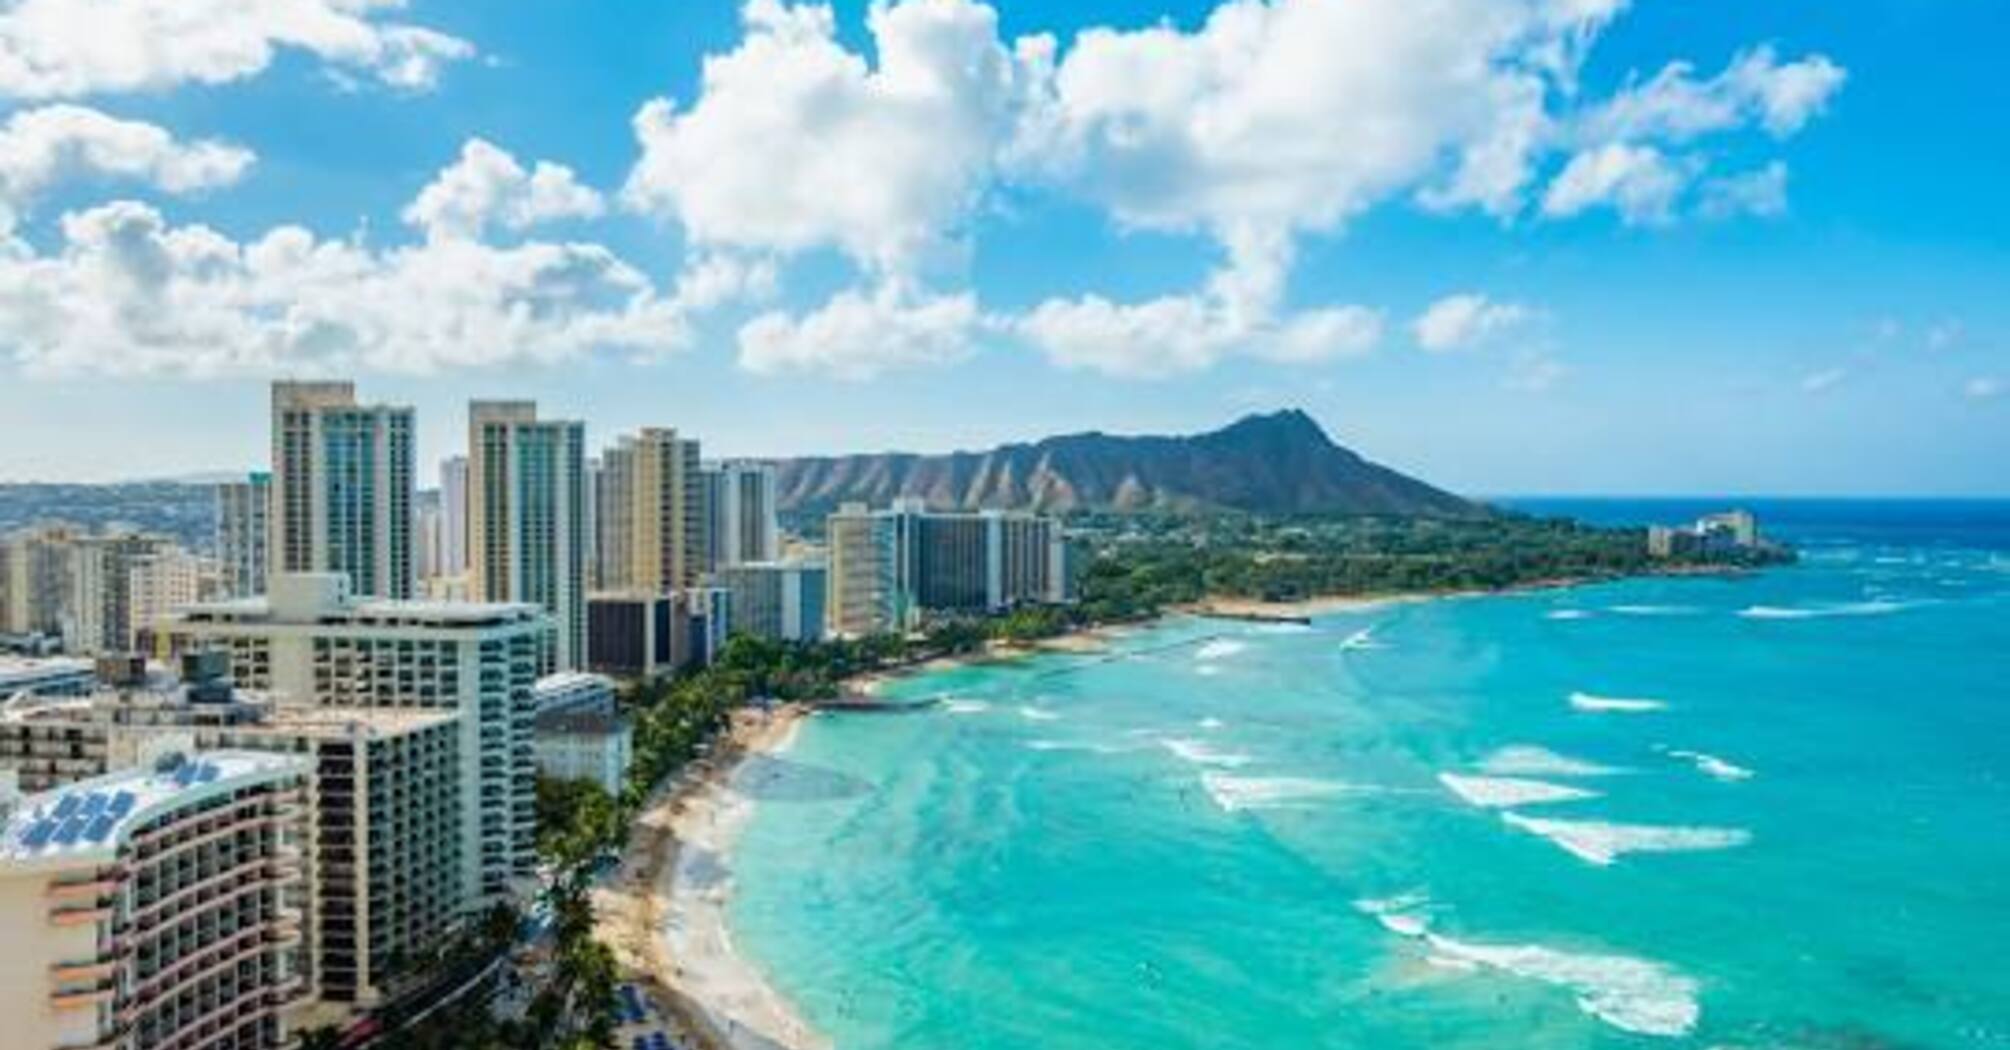 The best time to visit Hawaii has been named